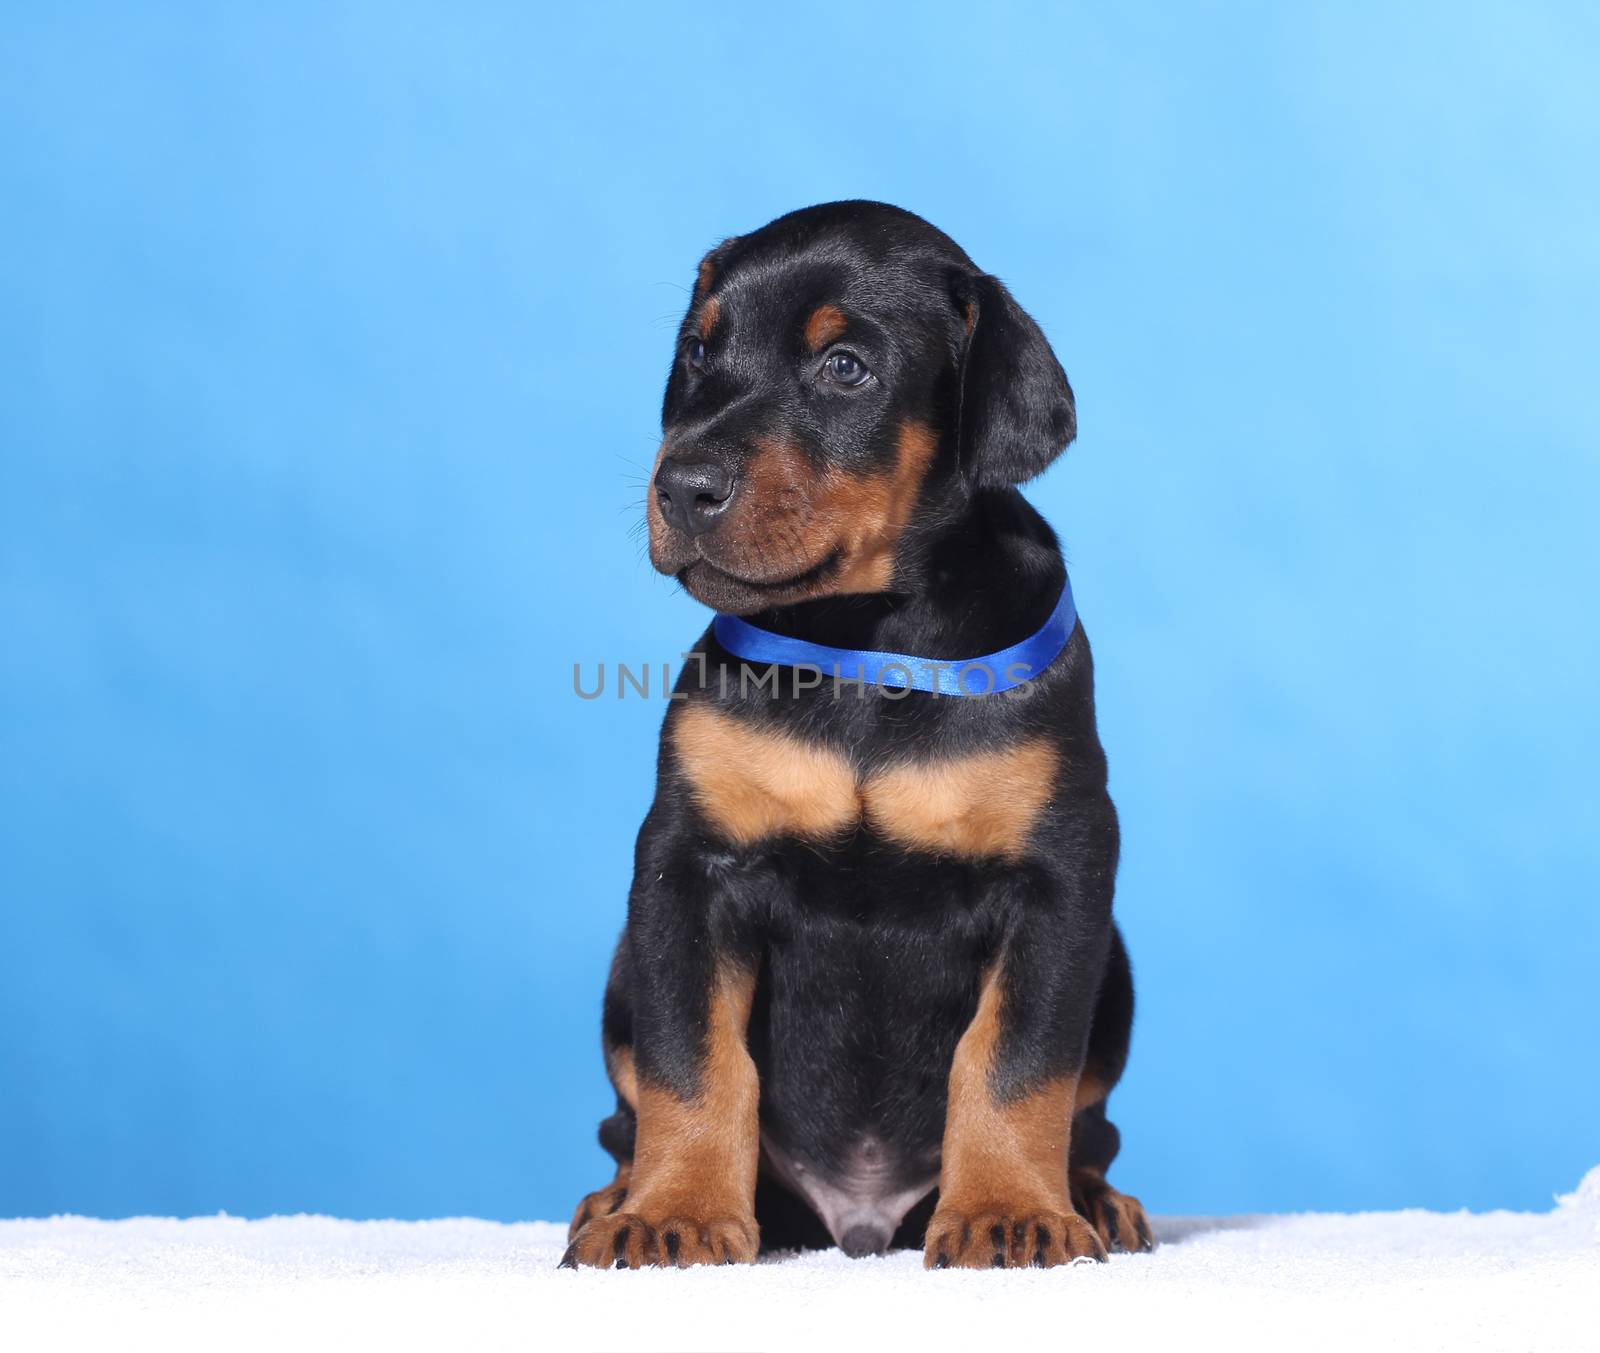 Portrait of Puppy with blue belt  on blue background by gsdonlin